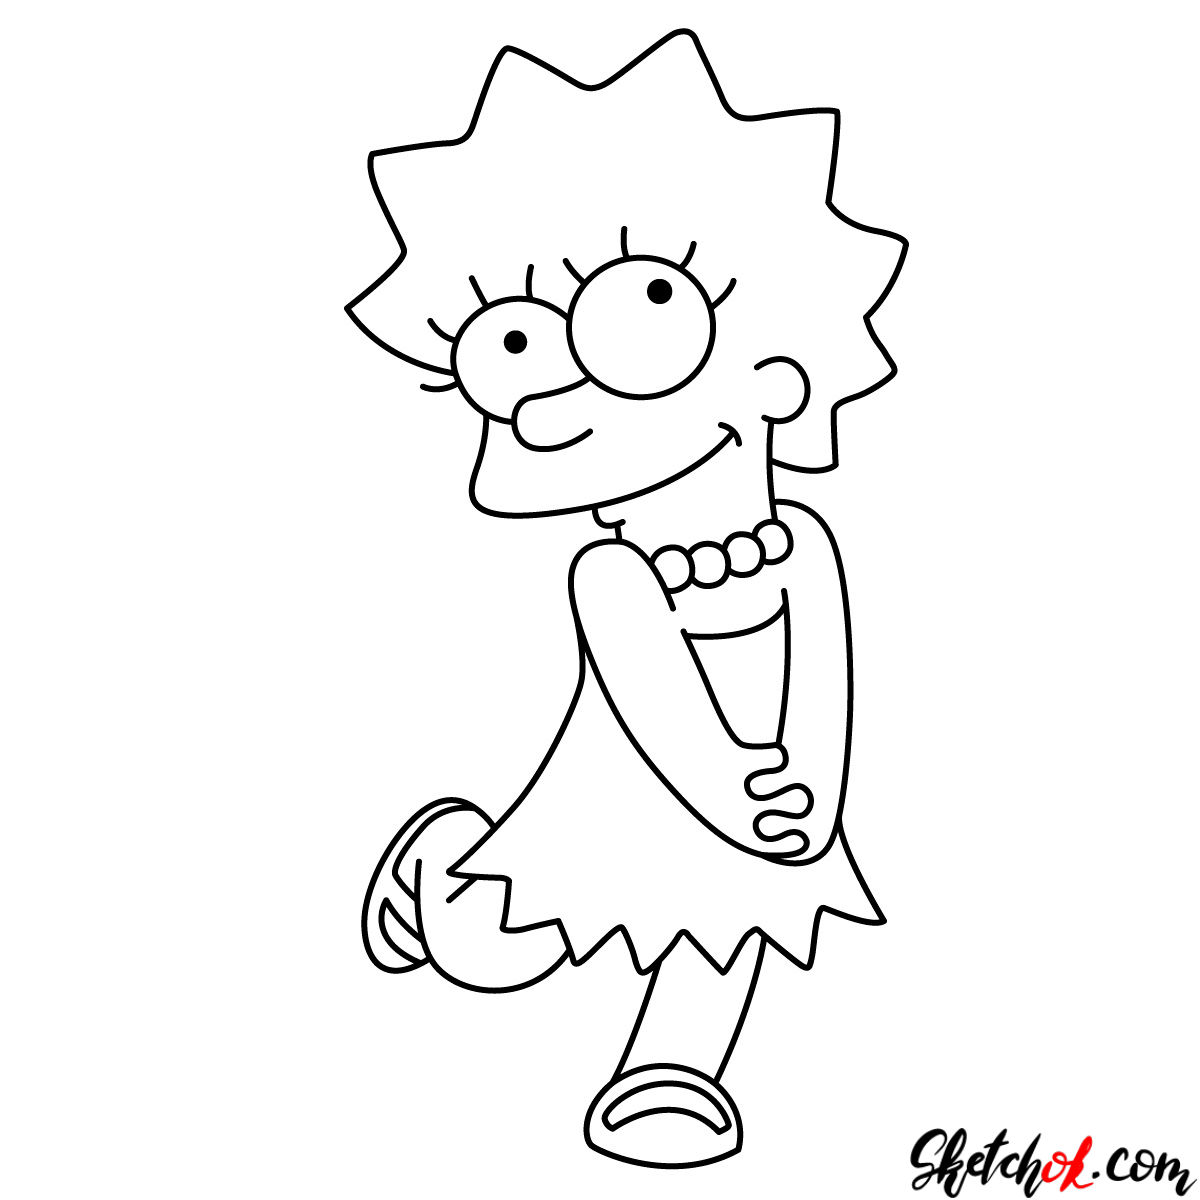 How to draw cute Lisa Simpson - step 09